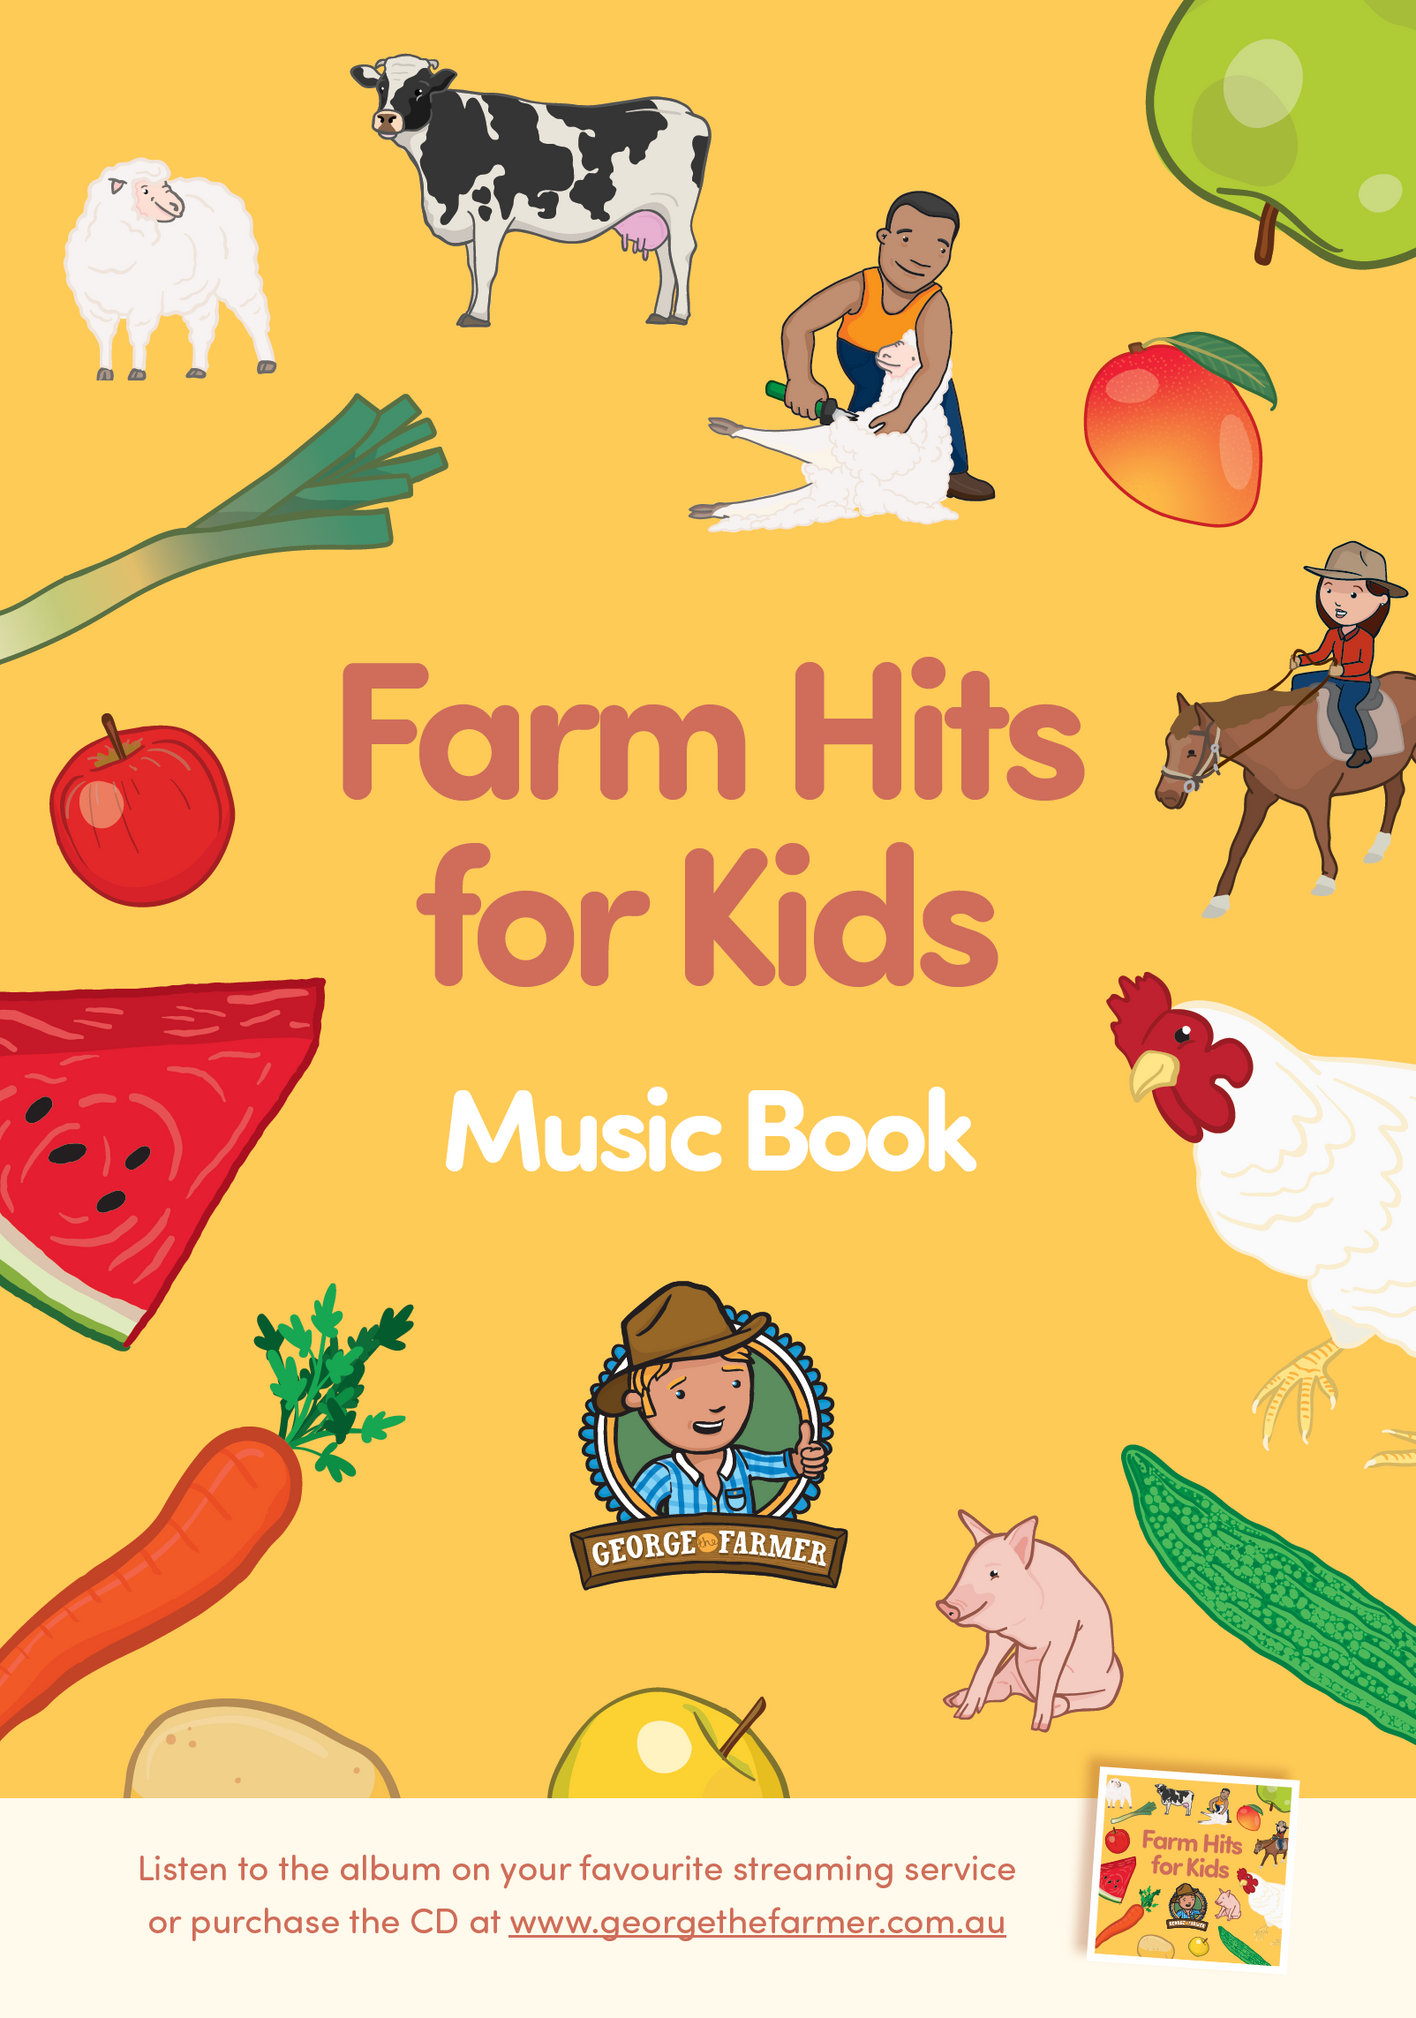 Farm Hits for Kids Music Book